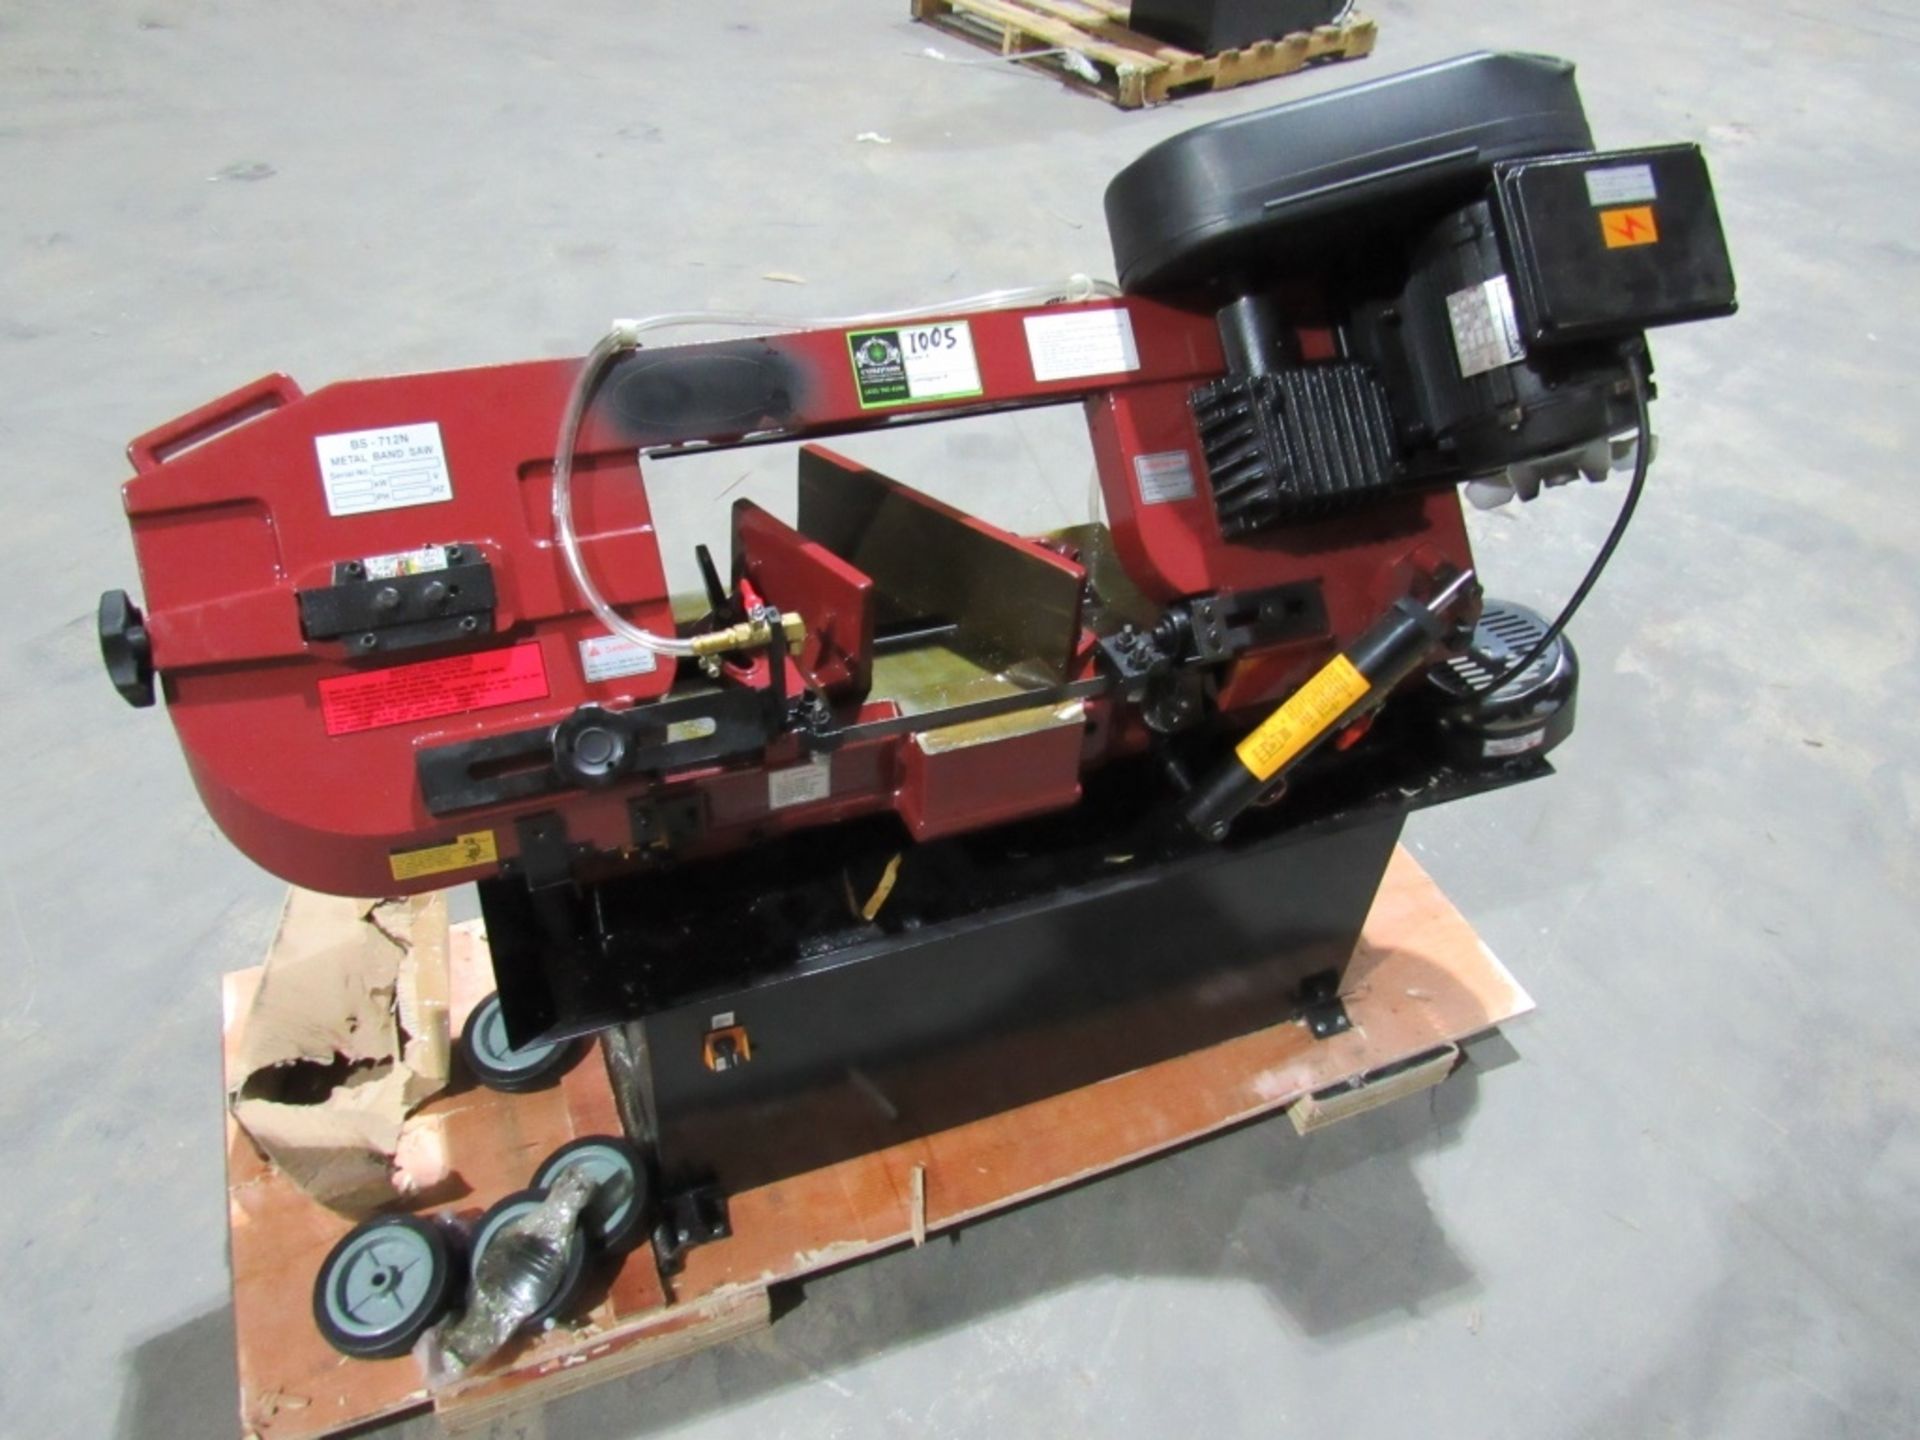 Metal Band Saw- MFR - Unknown Model - BS-712N 115/230 Volts 11 kW 1 Phase **Powers on and Operates**